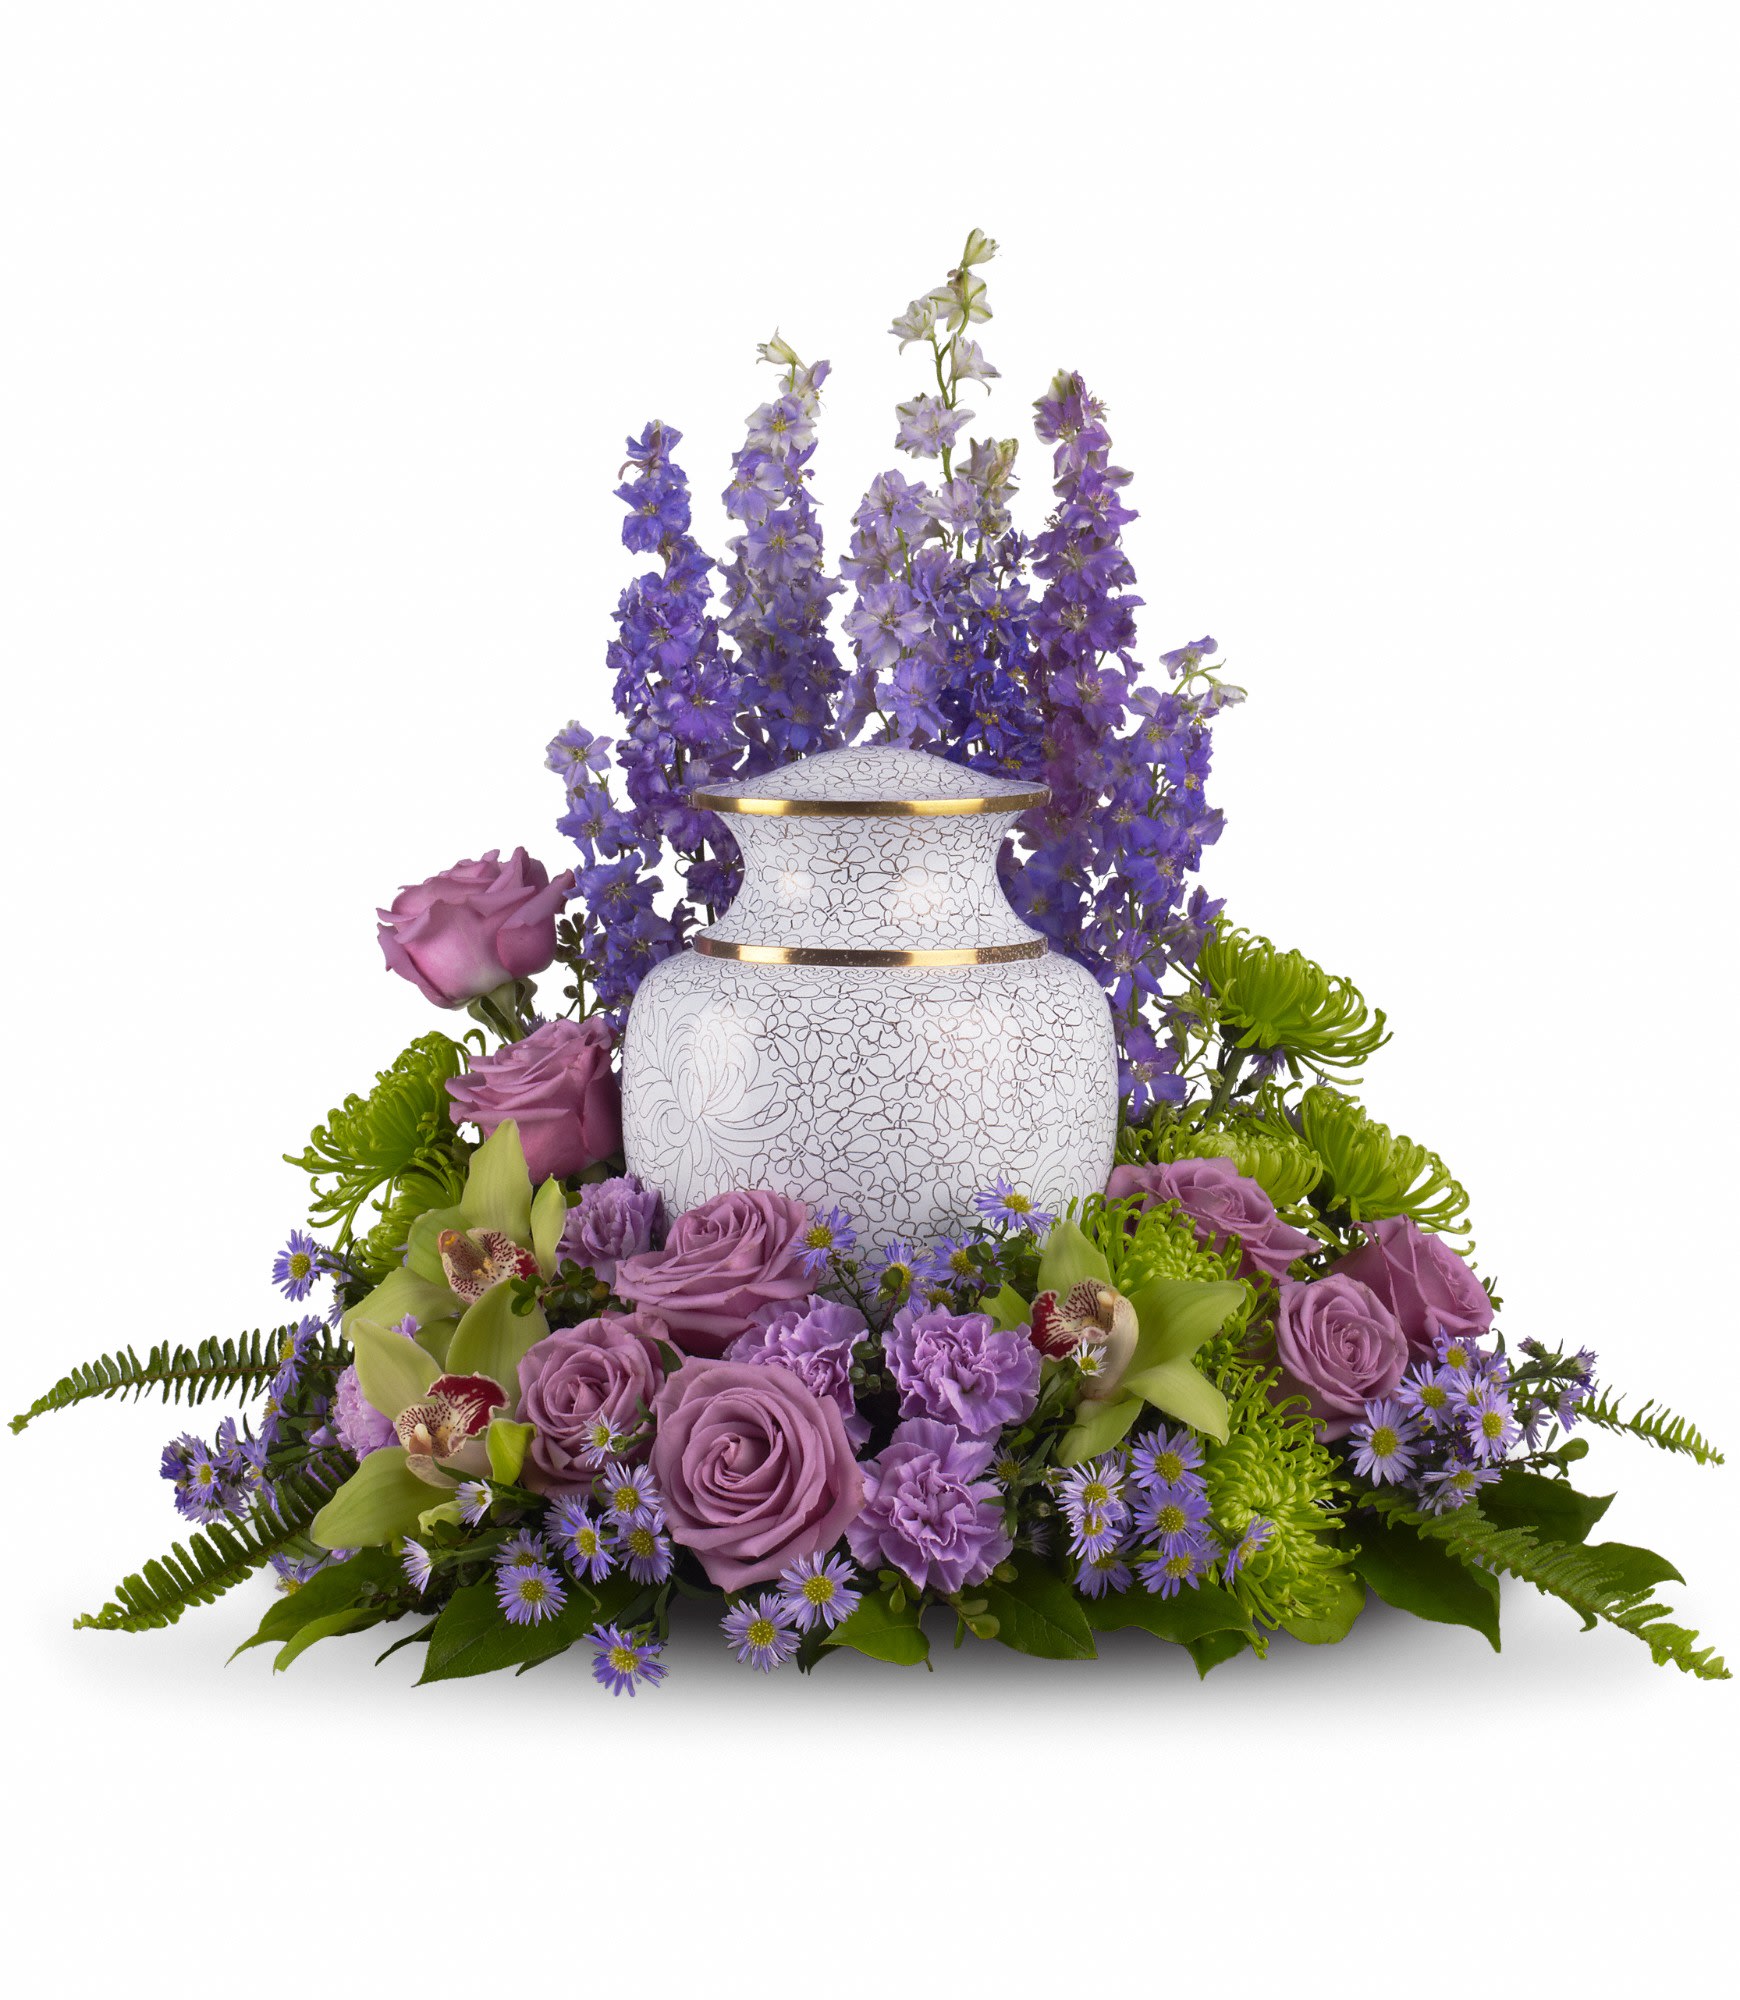 Meadows of Memories - Soft lavender and green blooms to surround the urn, like a peaceful, contemplative garden. 